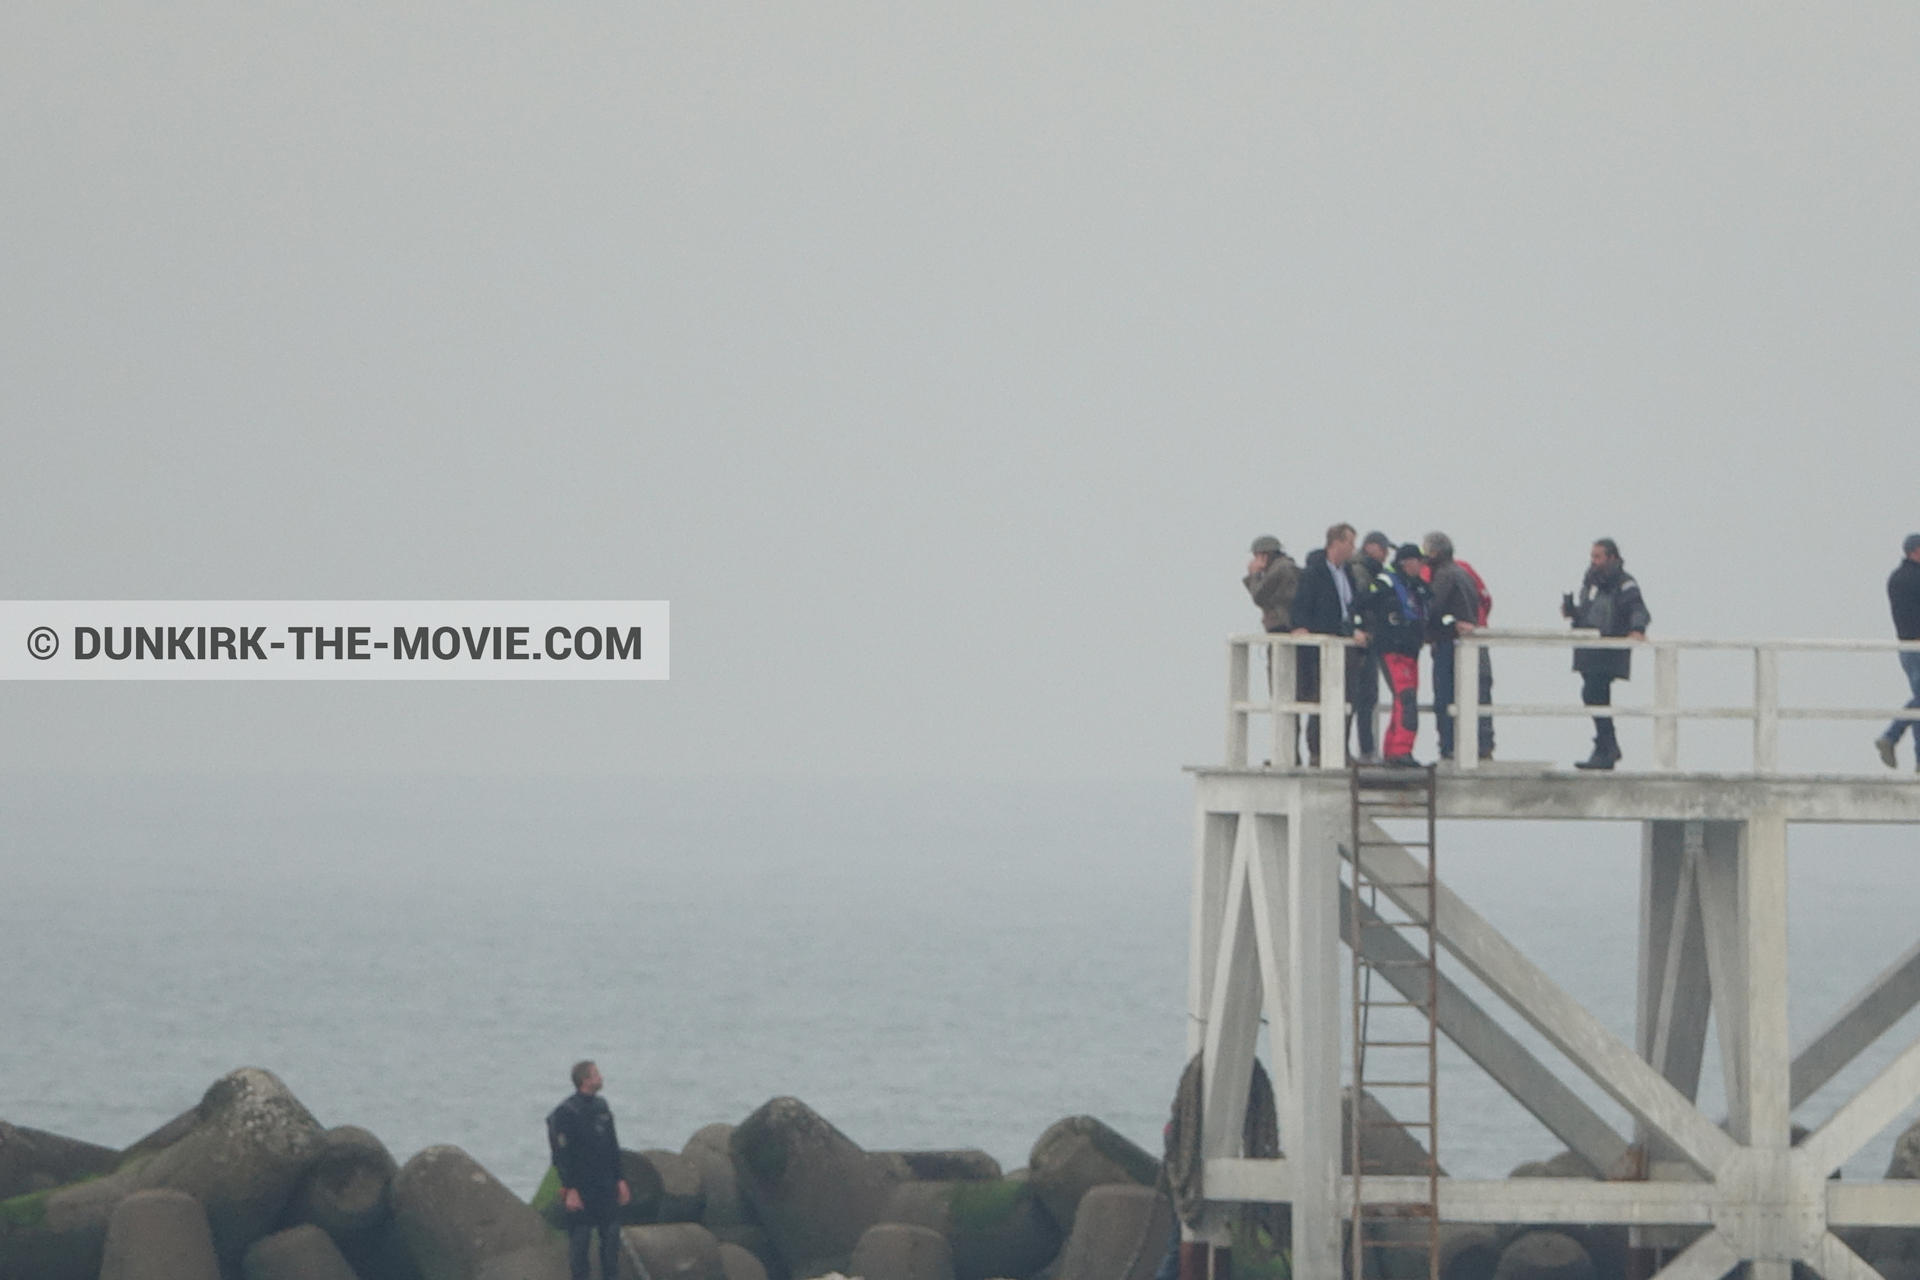 Picture with actor, grey sky, Hoyte van Hoytema, EST pier, Christopher Nolan, Nilo Otero,  from behind the scene of the Dunkirk movie by Nolan